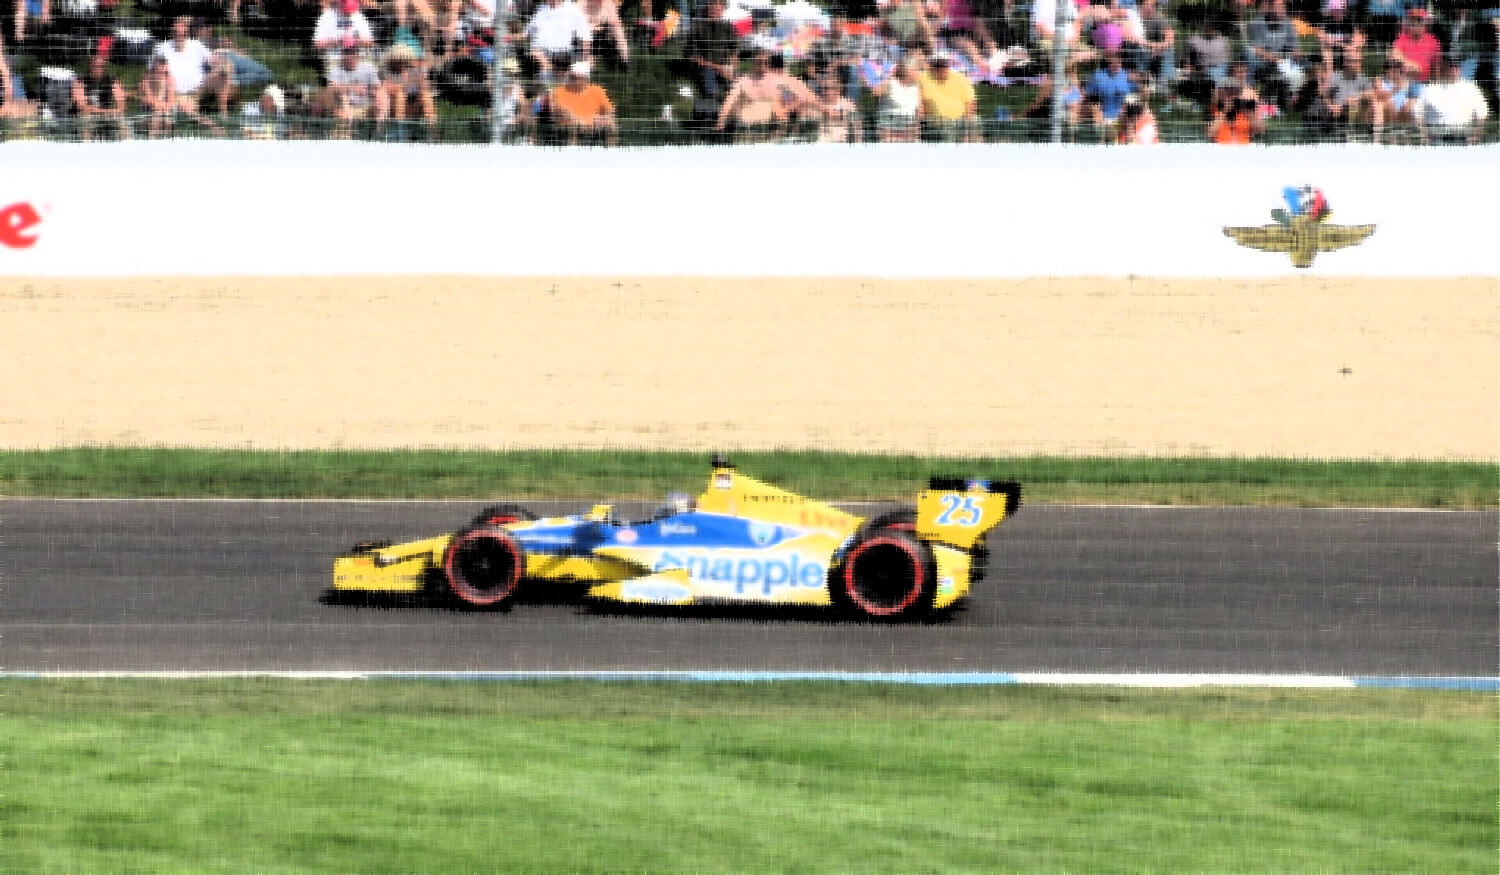 How Supply Chain Issues Are Affecting the Indy 500 and Indy Car